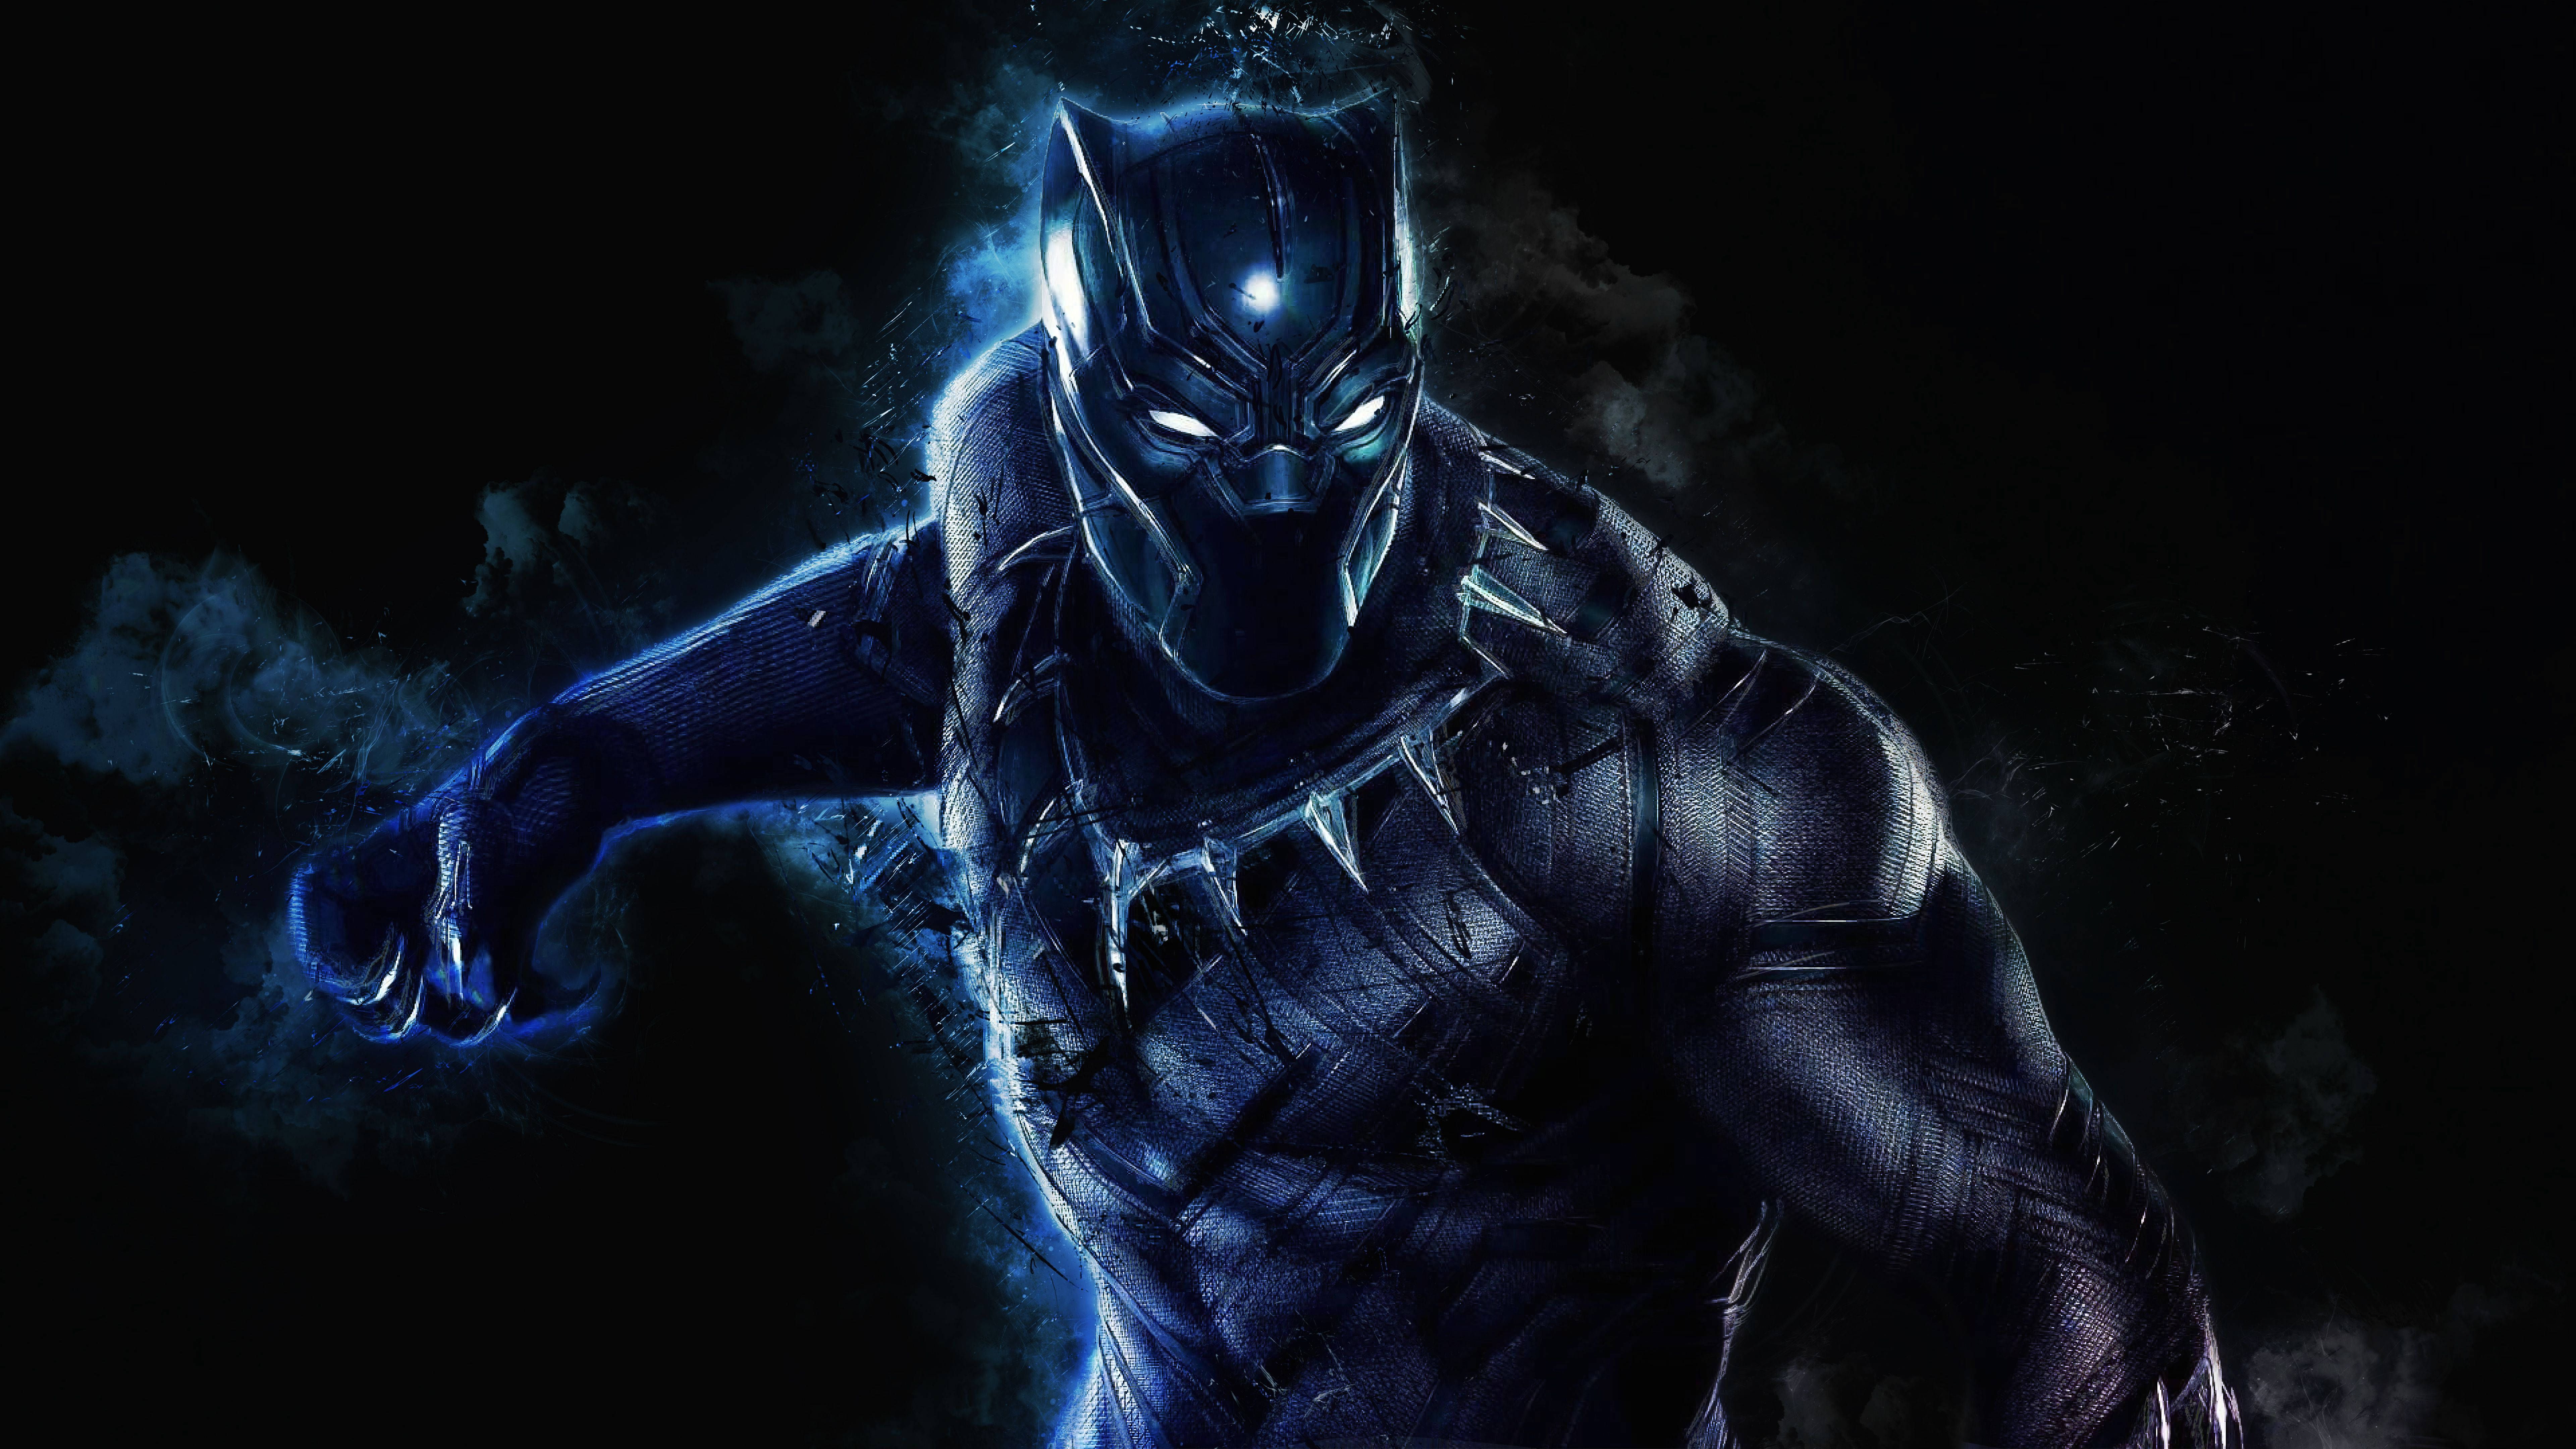  Black Panther Hintergrundbild 7680x4320. Download Marvel's Black Panther looking powerful and stylish Wallpaper